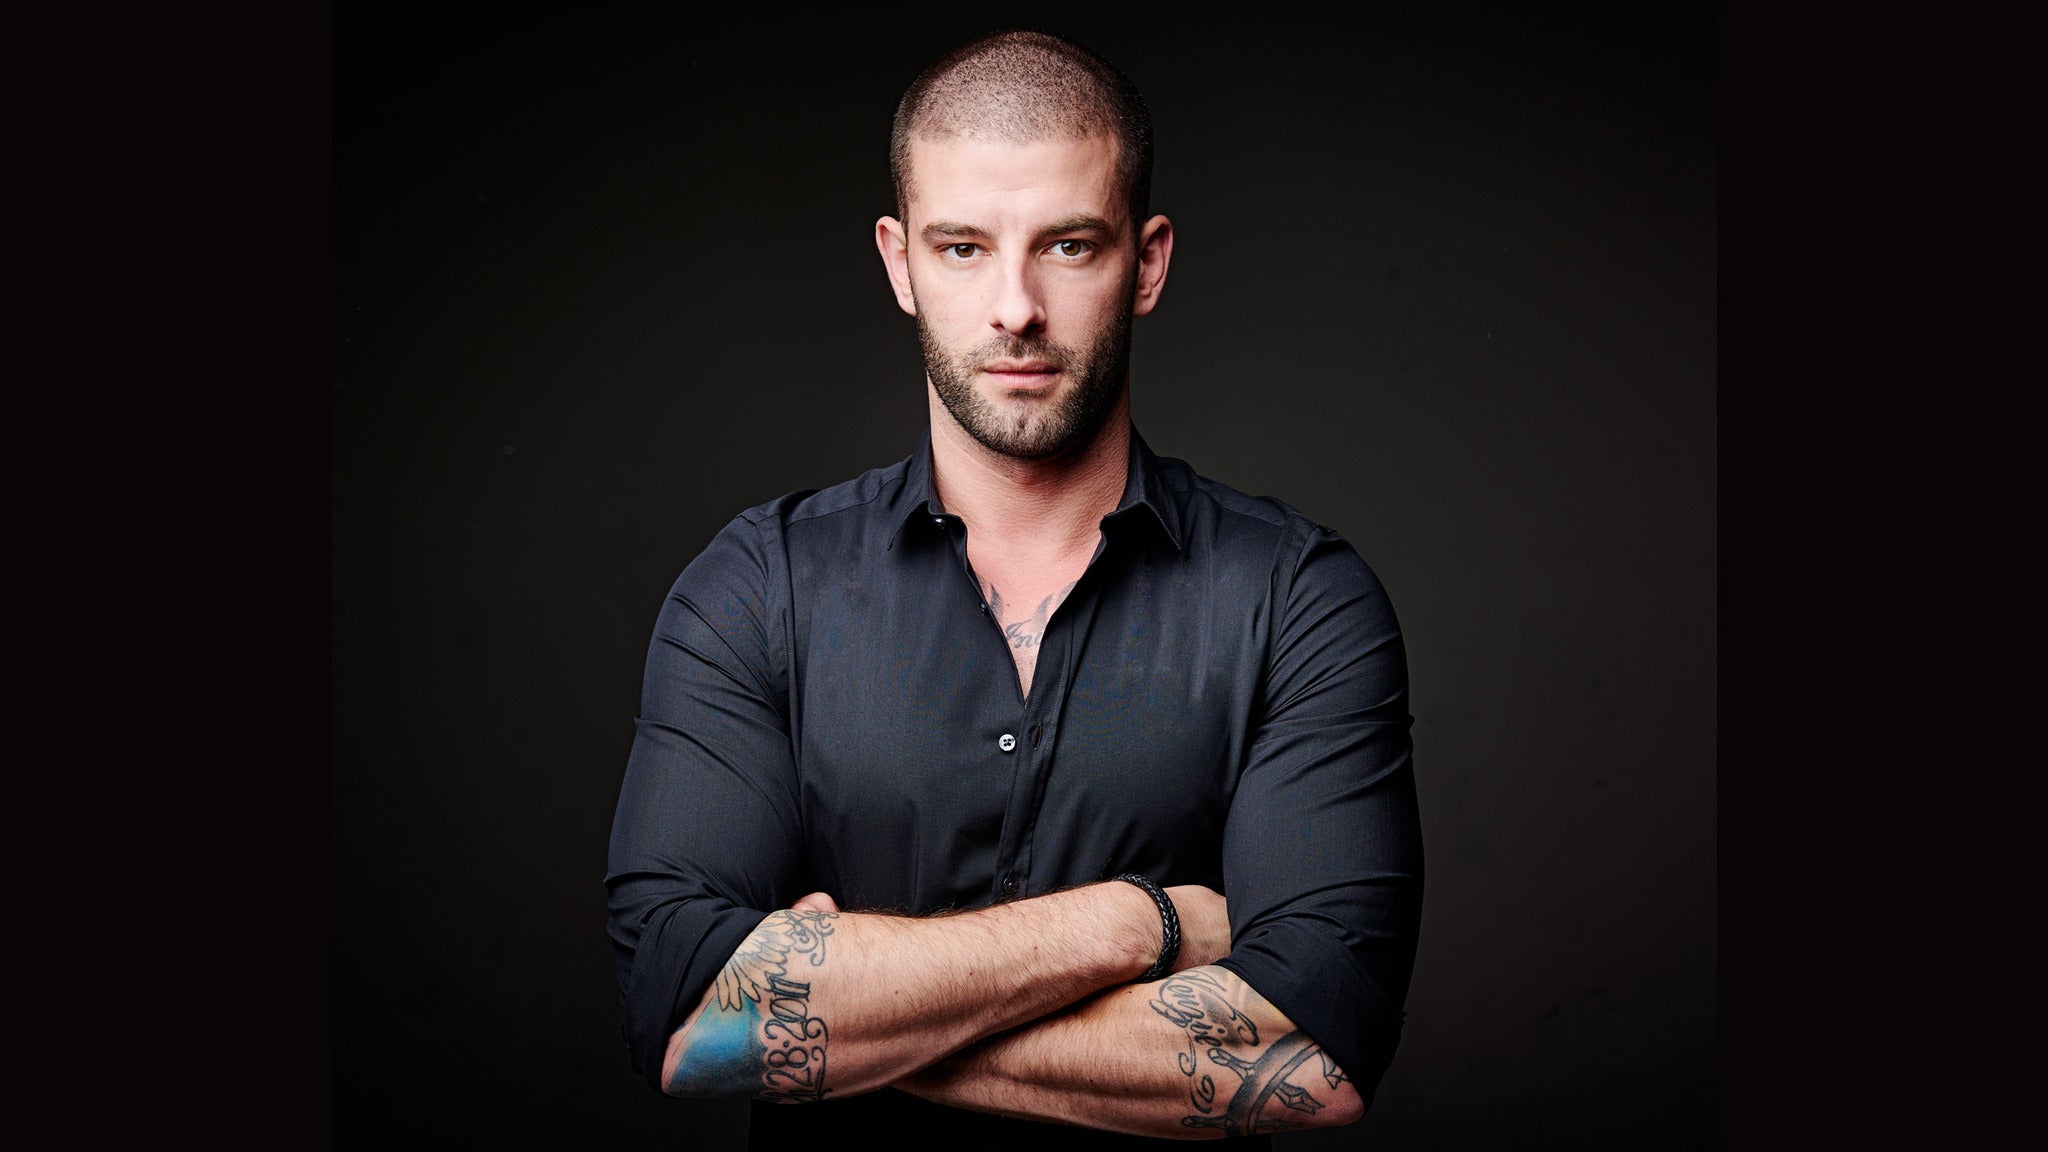 An Evening With Darcy Oake A Fundraiser For The Bruce Oake Foundation in Winnipeg event information